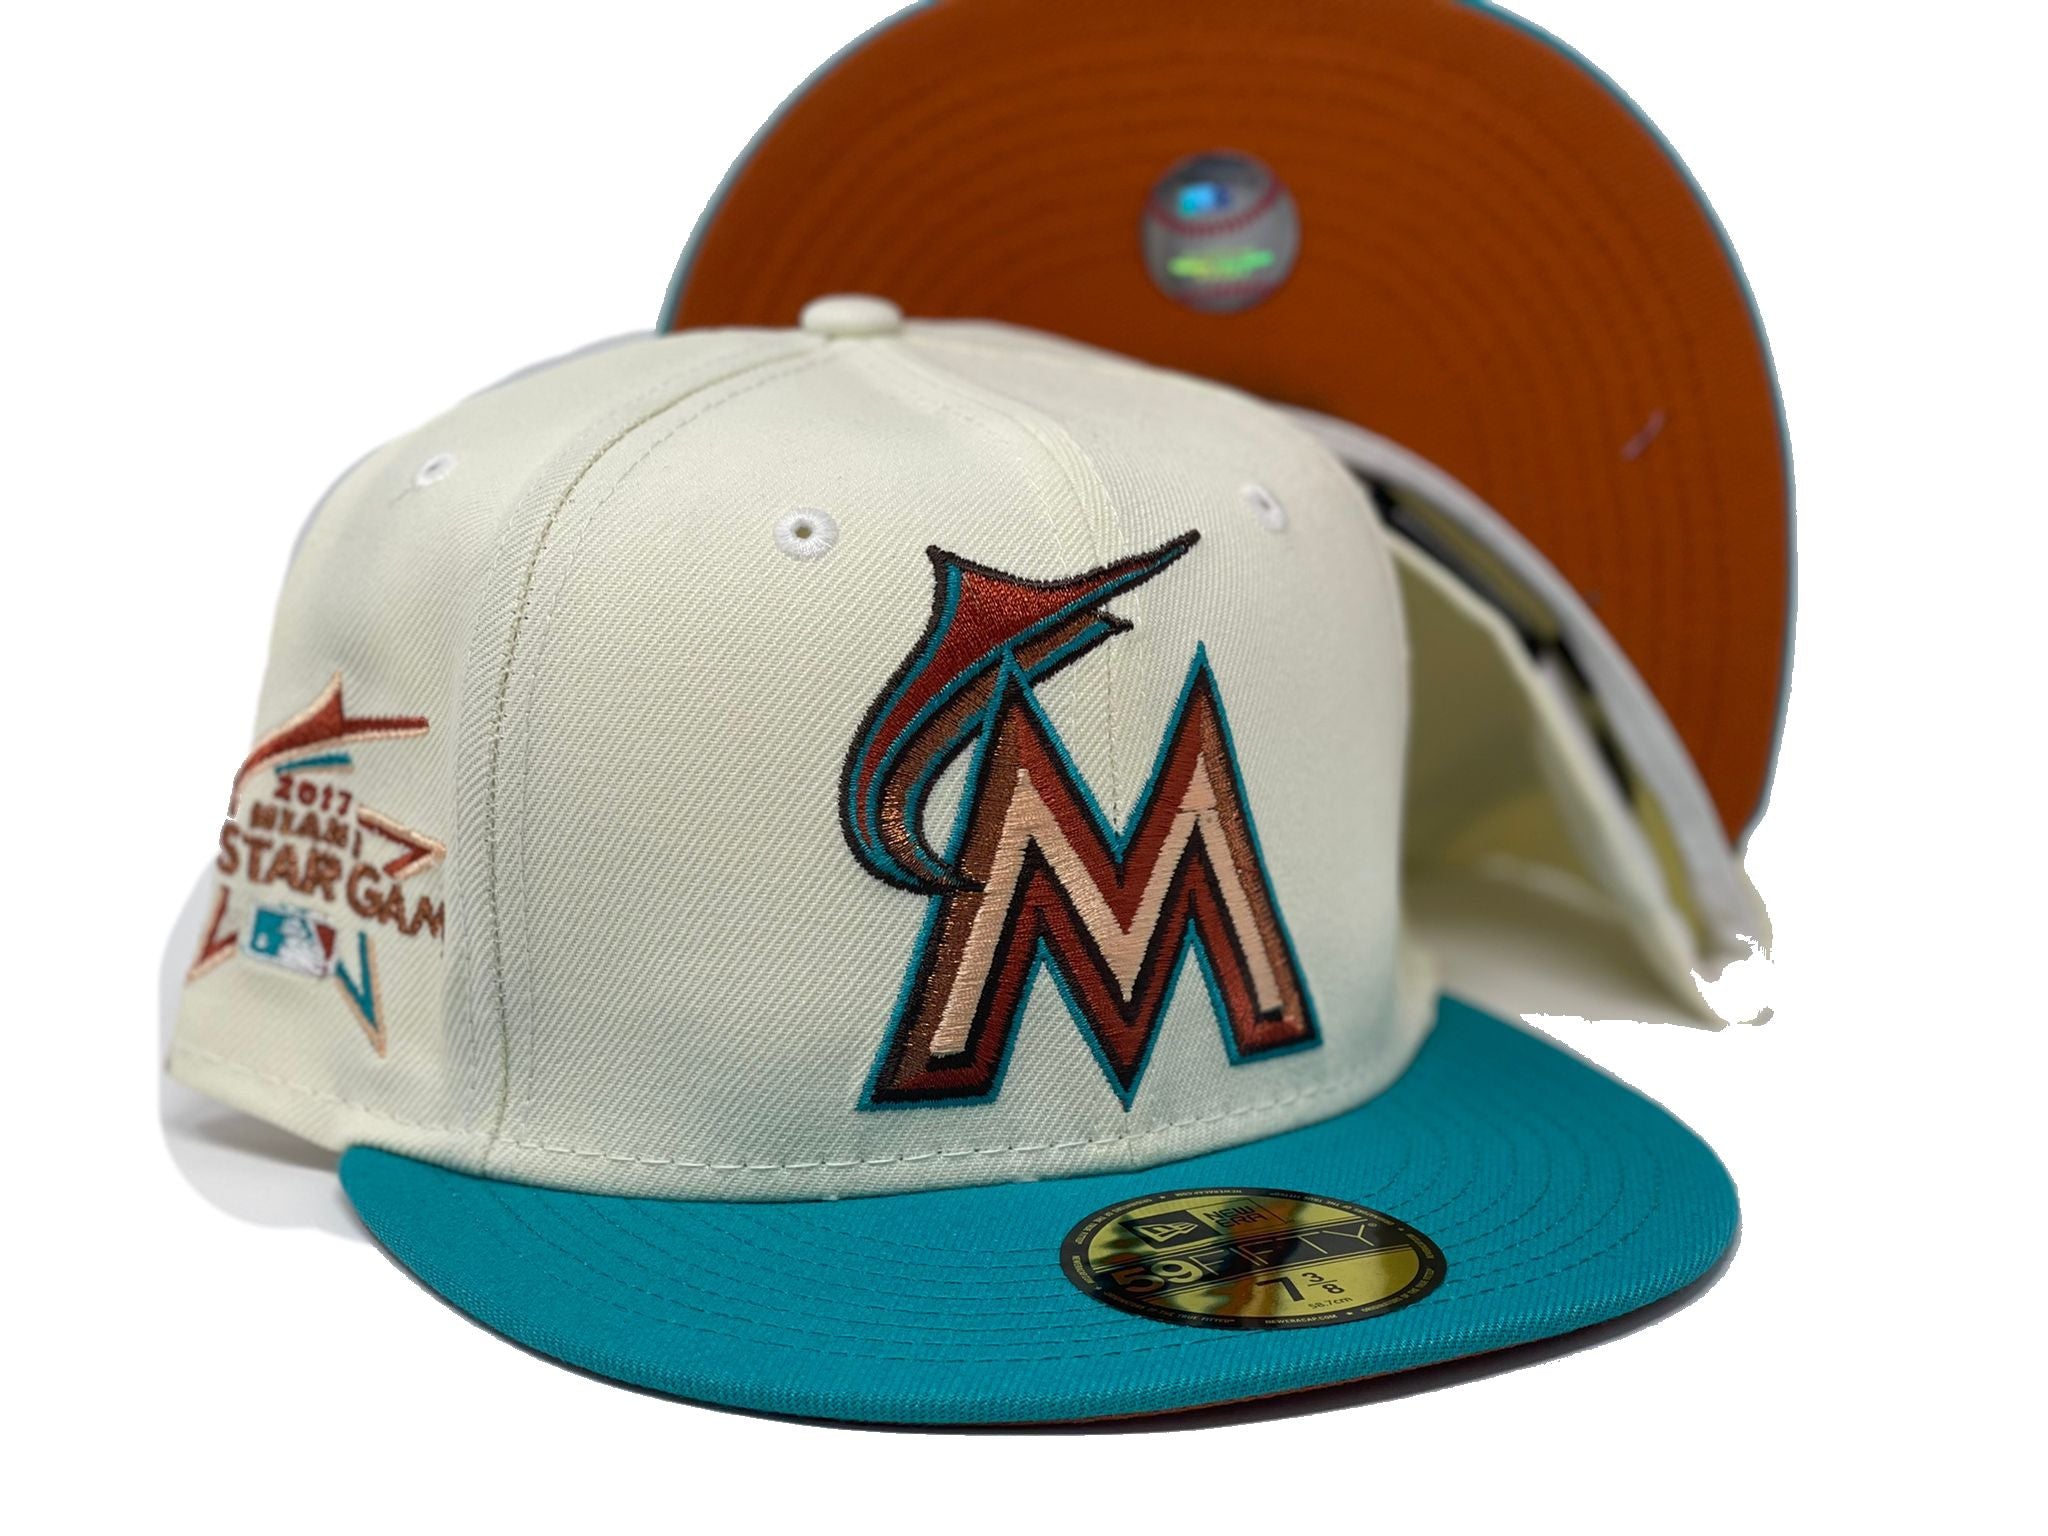 Miami Marlins (Florida Marlins) 2017 Official All Star Game Cap for Sale in  Miami, FL - OfferUp